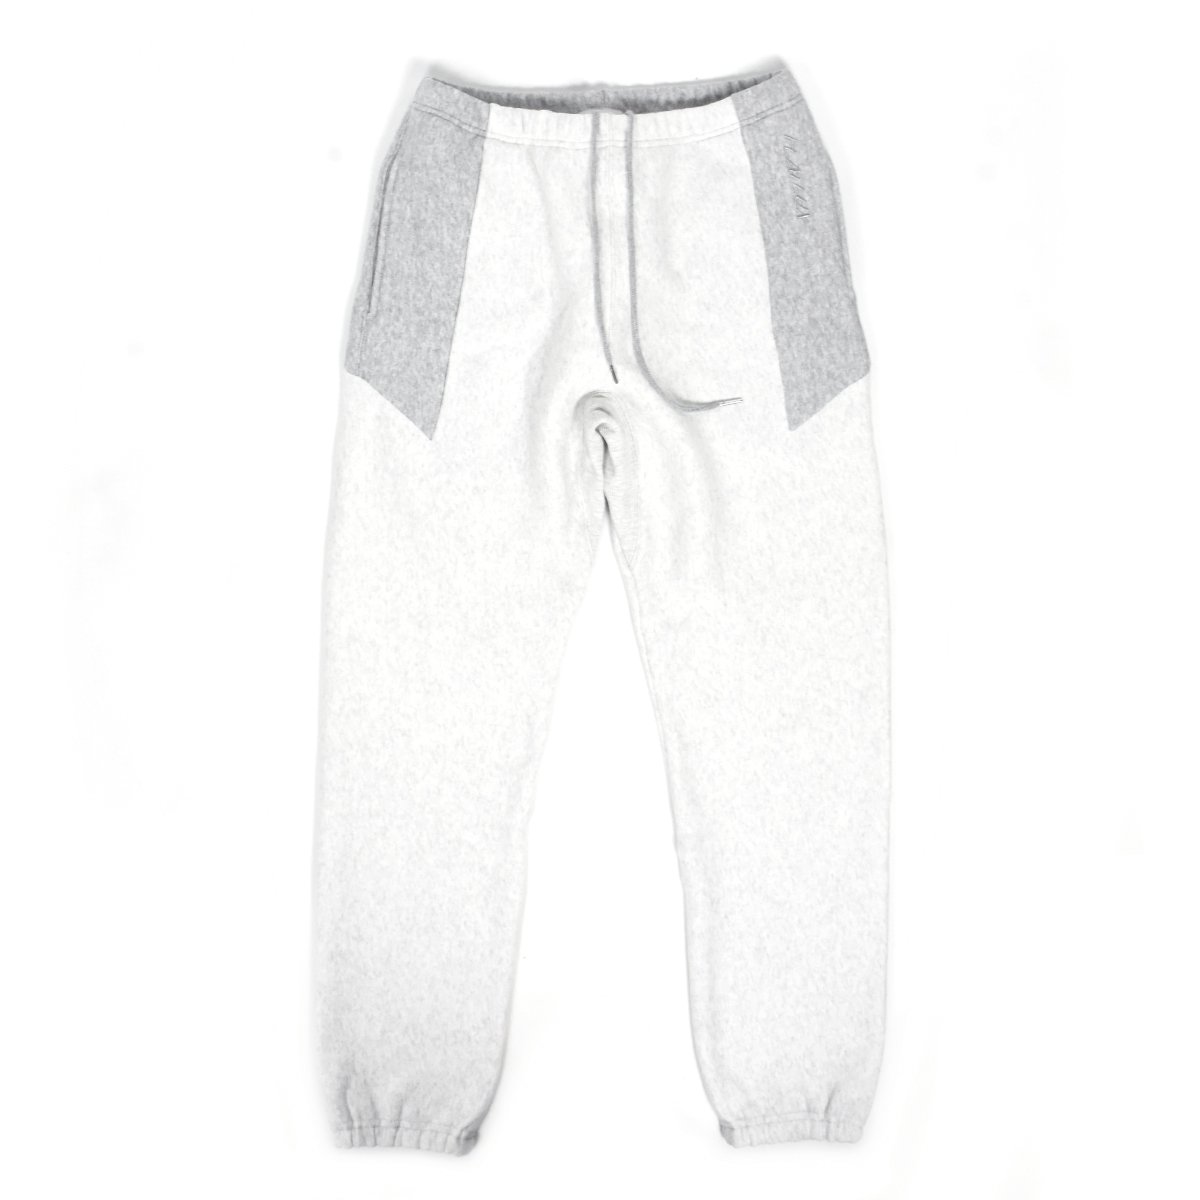 <img class='new_mark_img1' src='https://img.shop-pro.jp/img/new/icons20.gif' style='border:none;display:inline;margin:0px;padding:0px;width:auto;' />【FLATLUX】MP Sweat Pant 